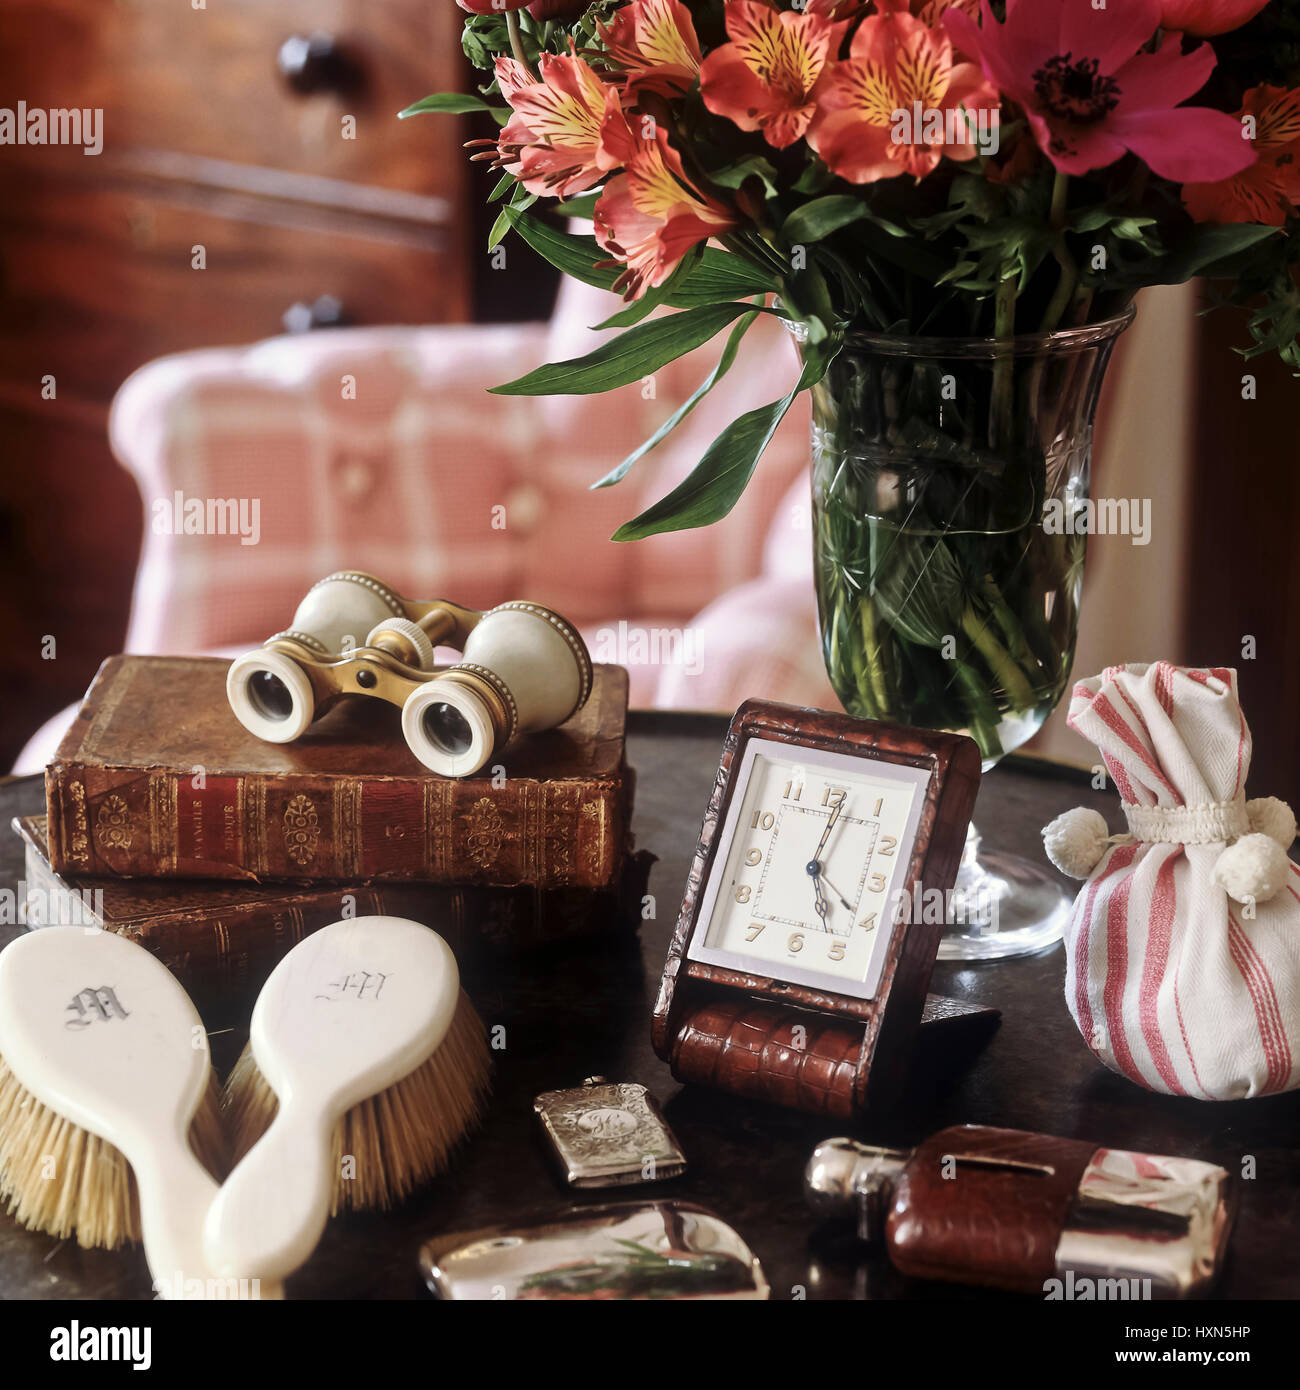 Vase of flowers and antiques on table. Stock Photo